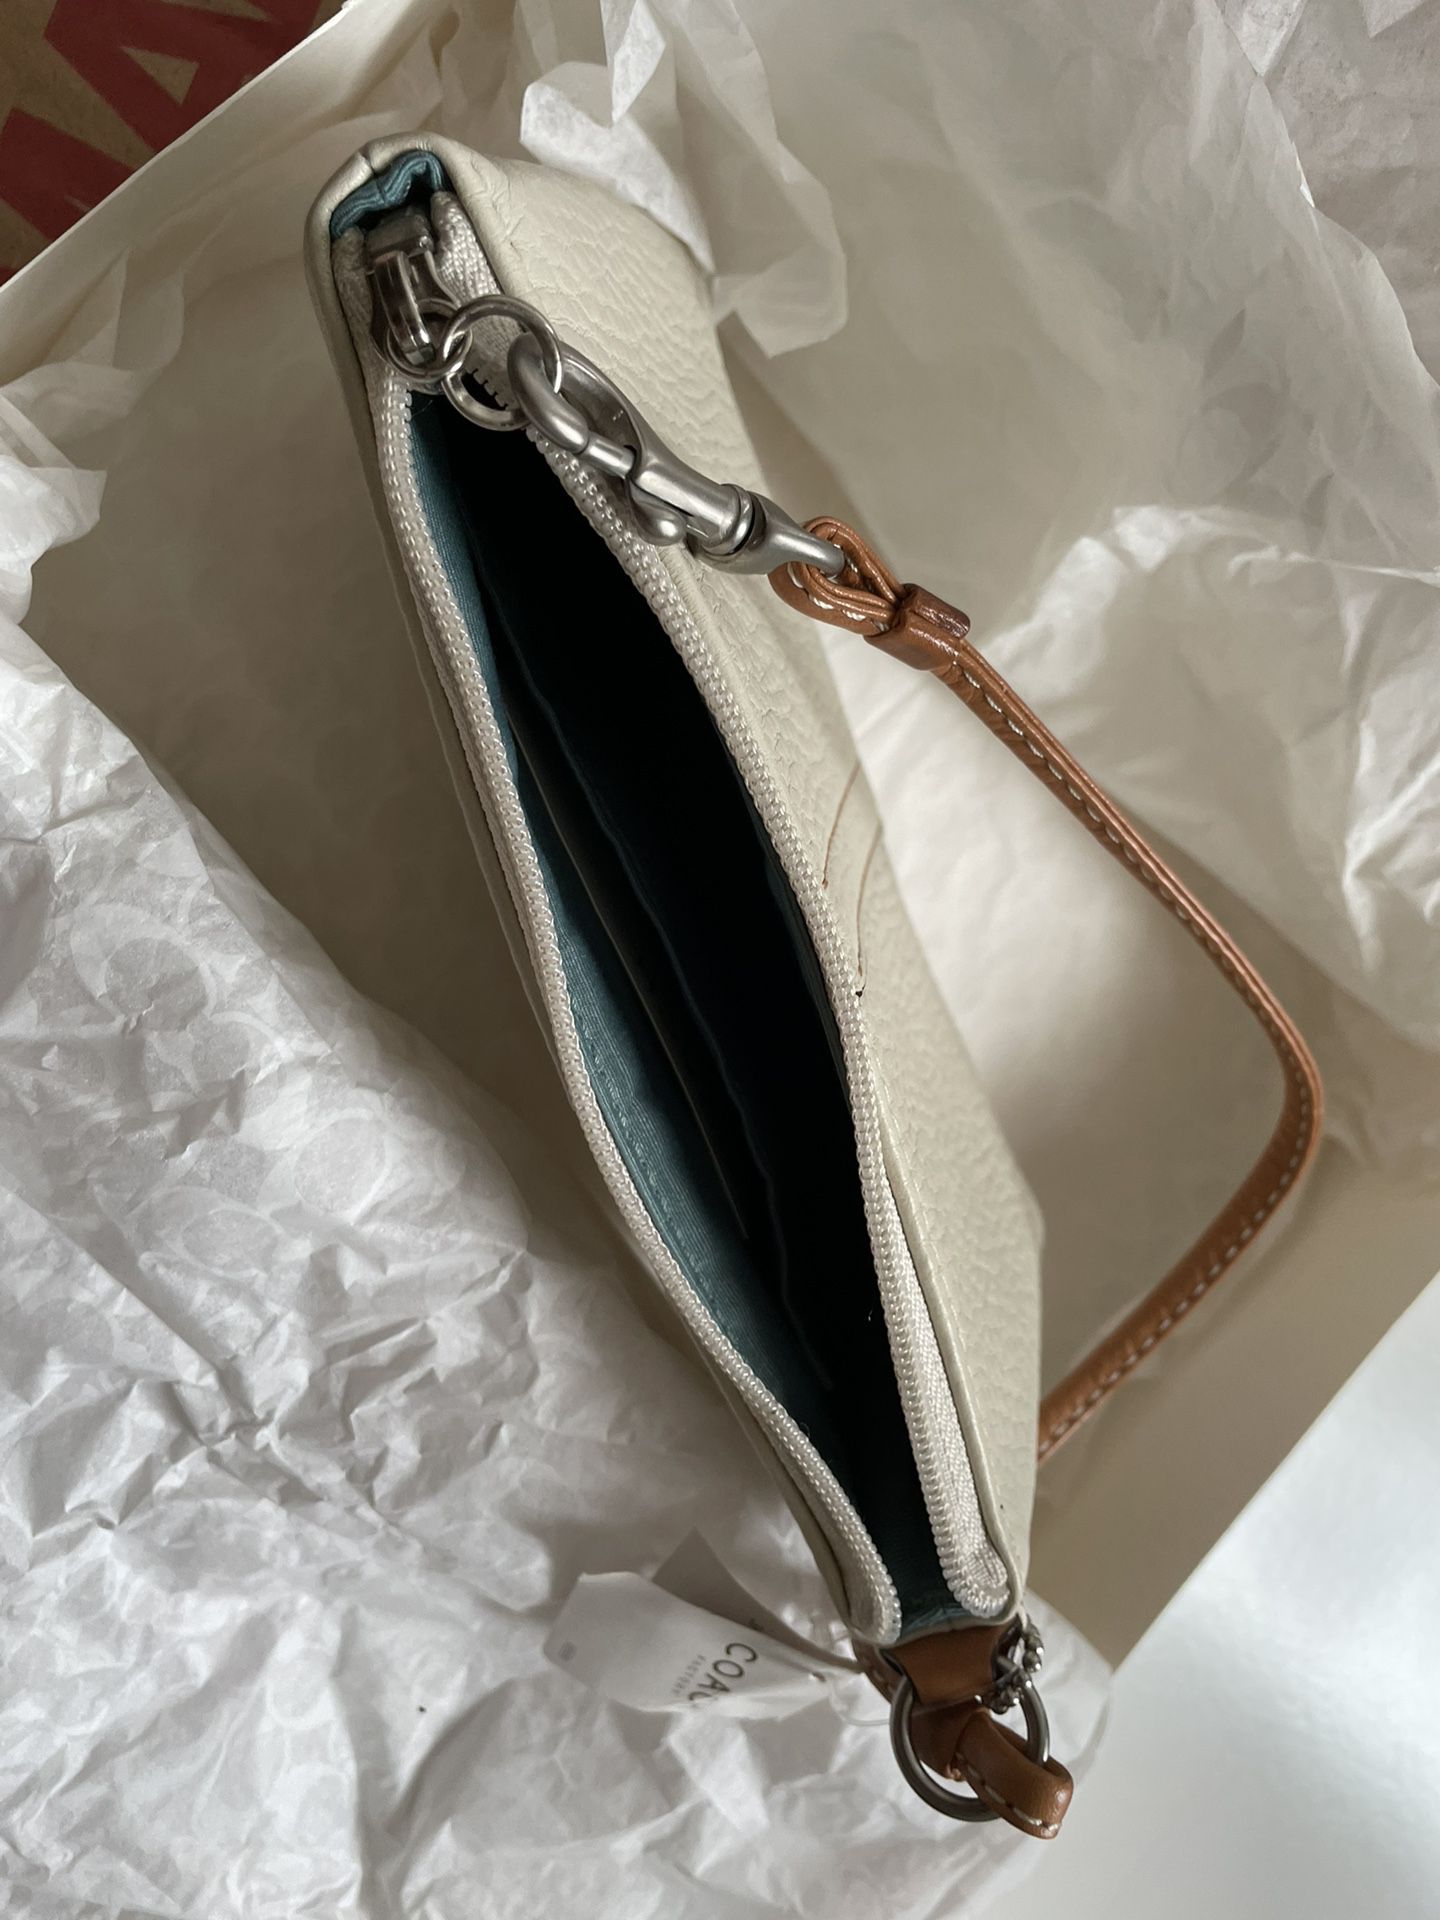 VIntage COACH Black Leather Bucket Bag for Sale in Queens, NY - OfferUp